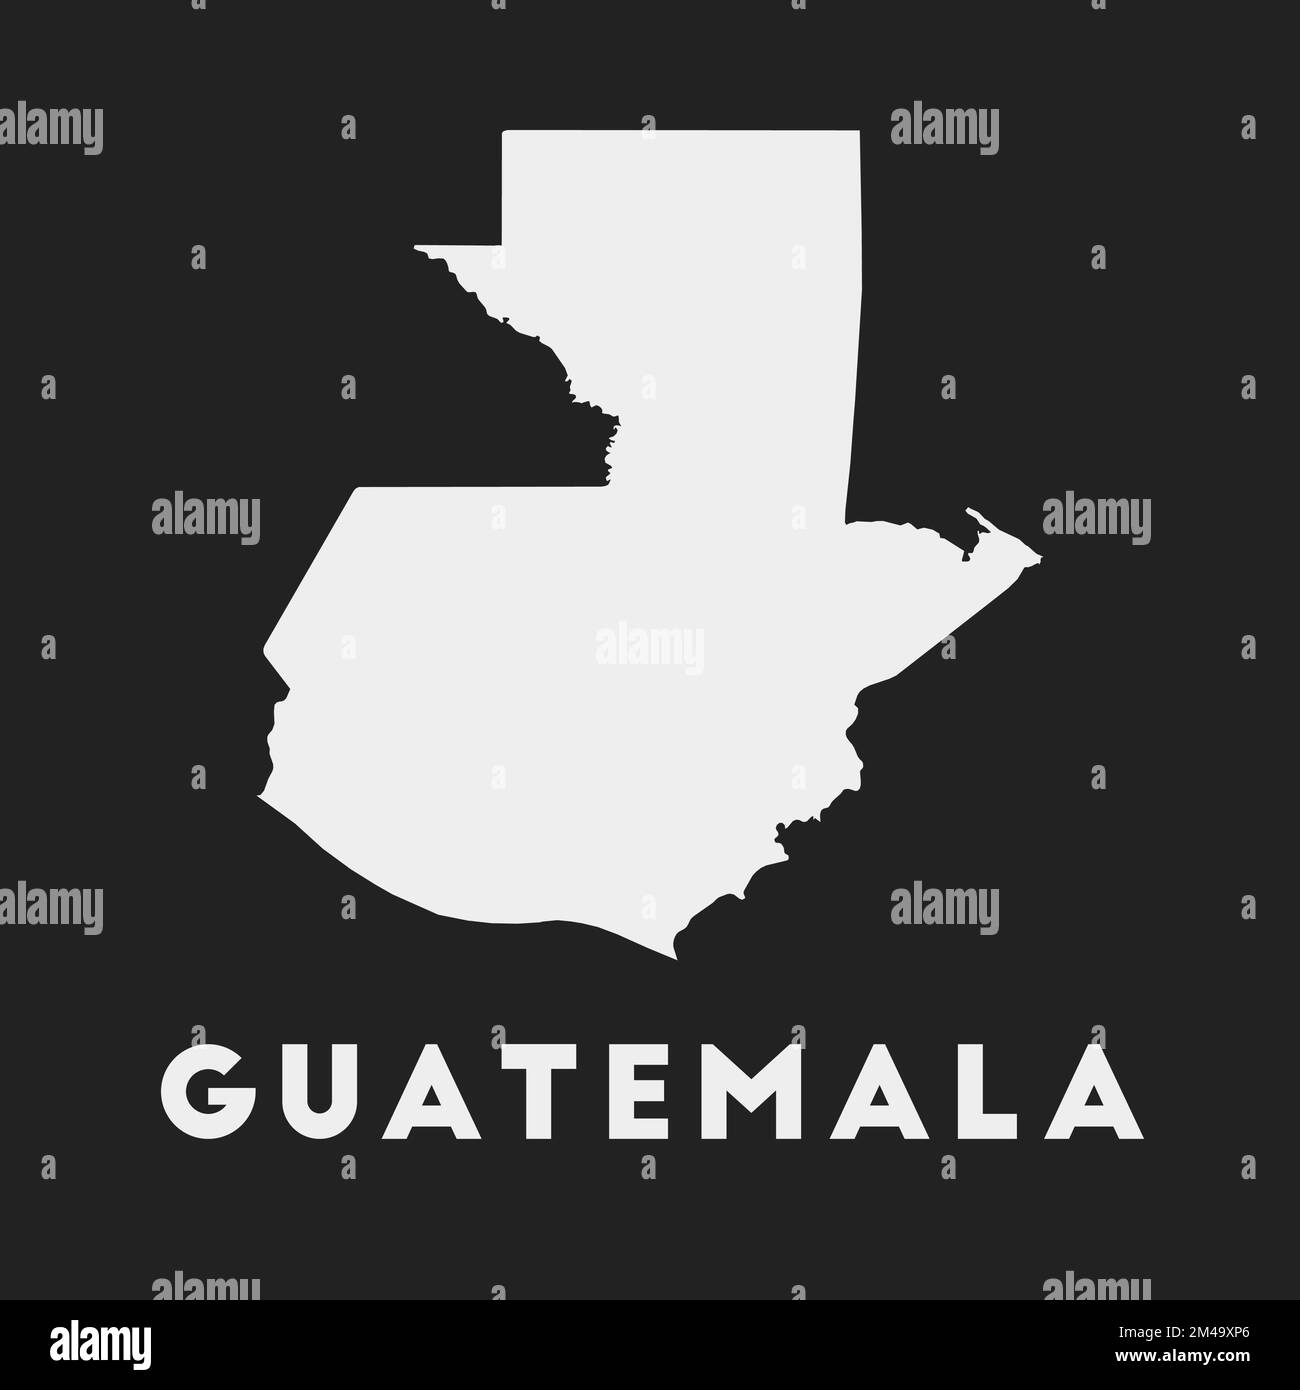 Guatemala icon. Country map on dark background. Stylish Guatemala map with country name. Vector illustration. Stock Vector